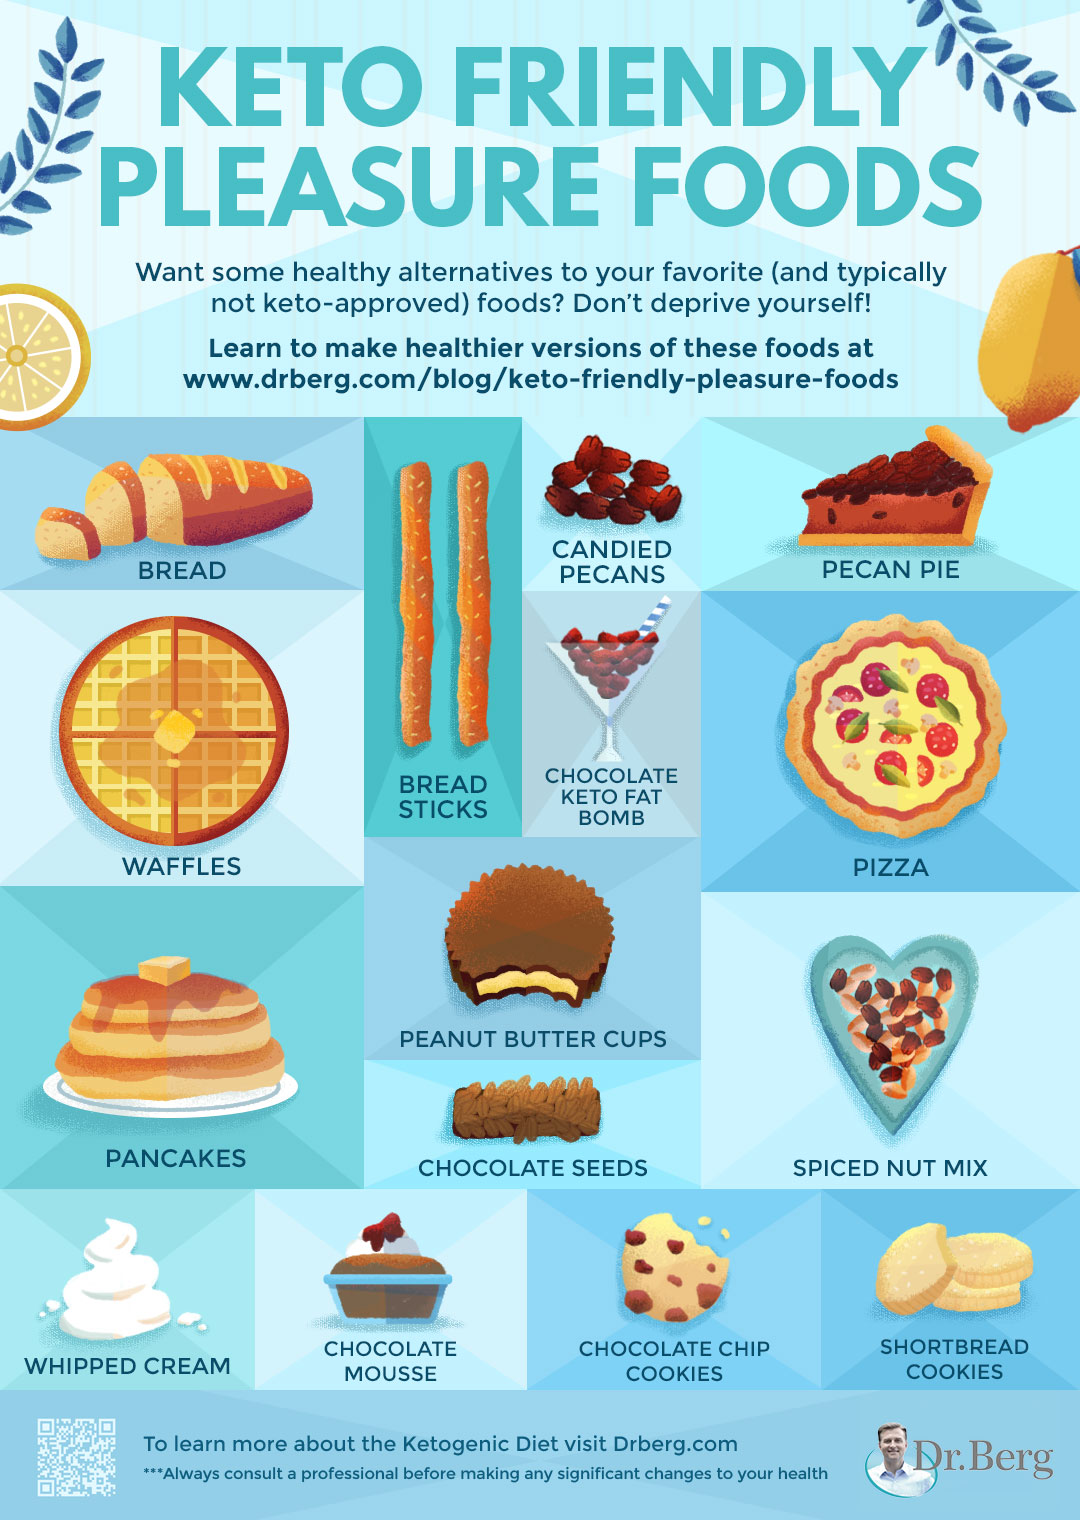 Keto-Friendly Pleasure Foods Infographic | Keto-Friendly Snacks You Can Enjoy Without the Guilt | Dr. Berg Blog